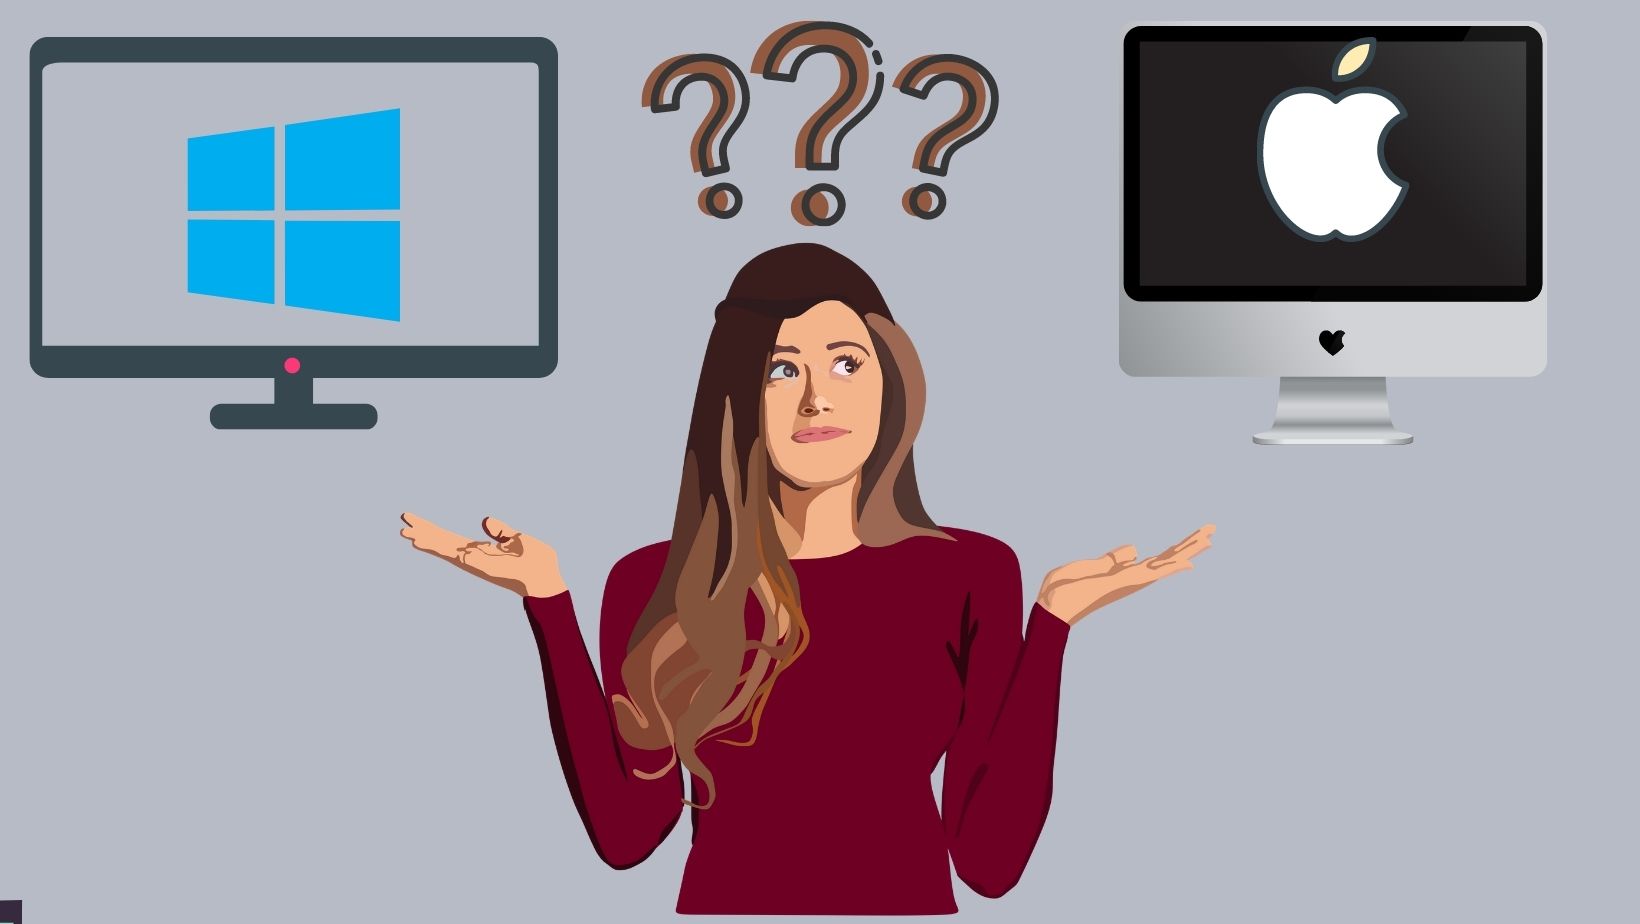 Windows vs Mac which is better